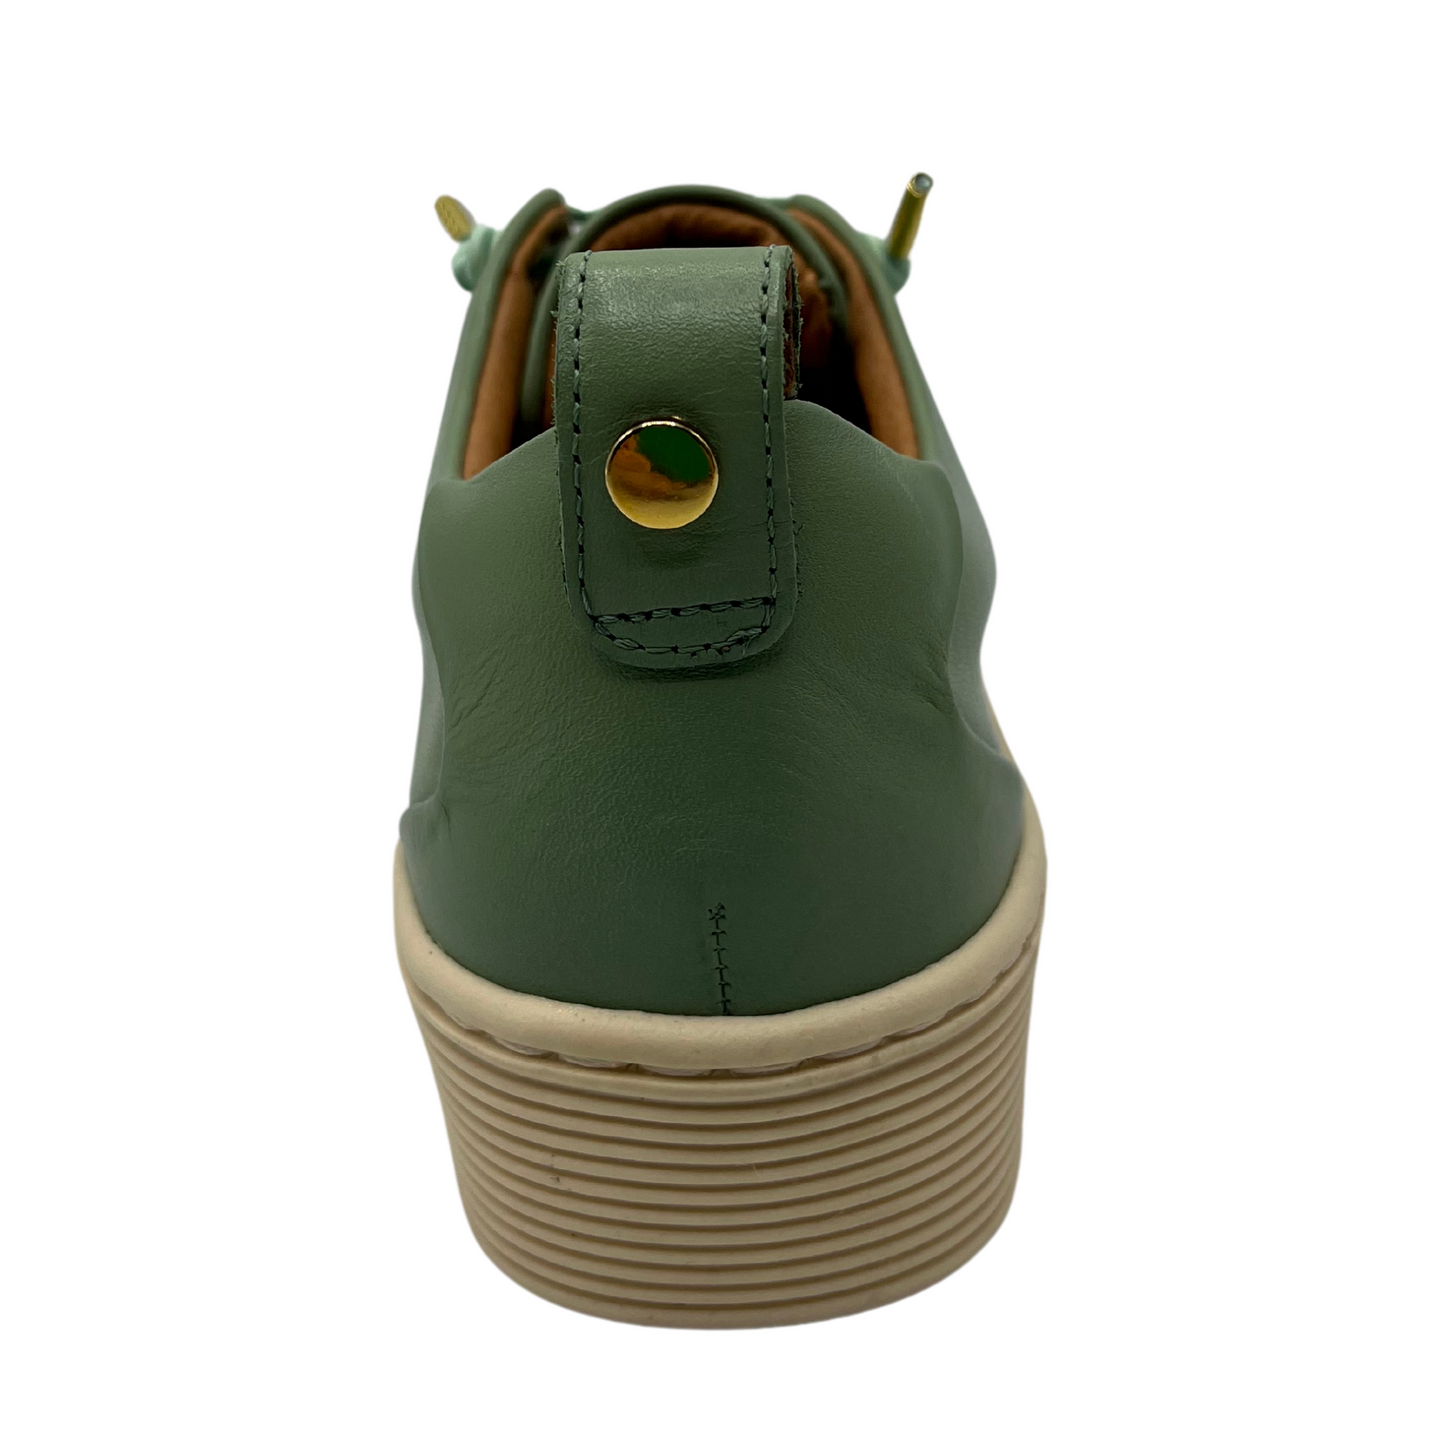 Back view of green leather sneaker with beige rubber outsole